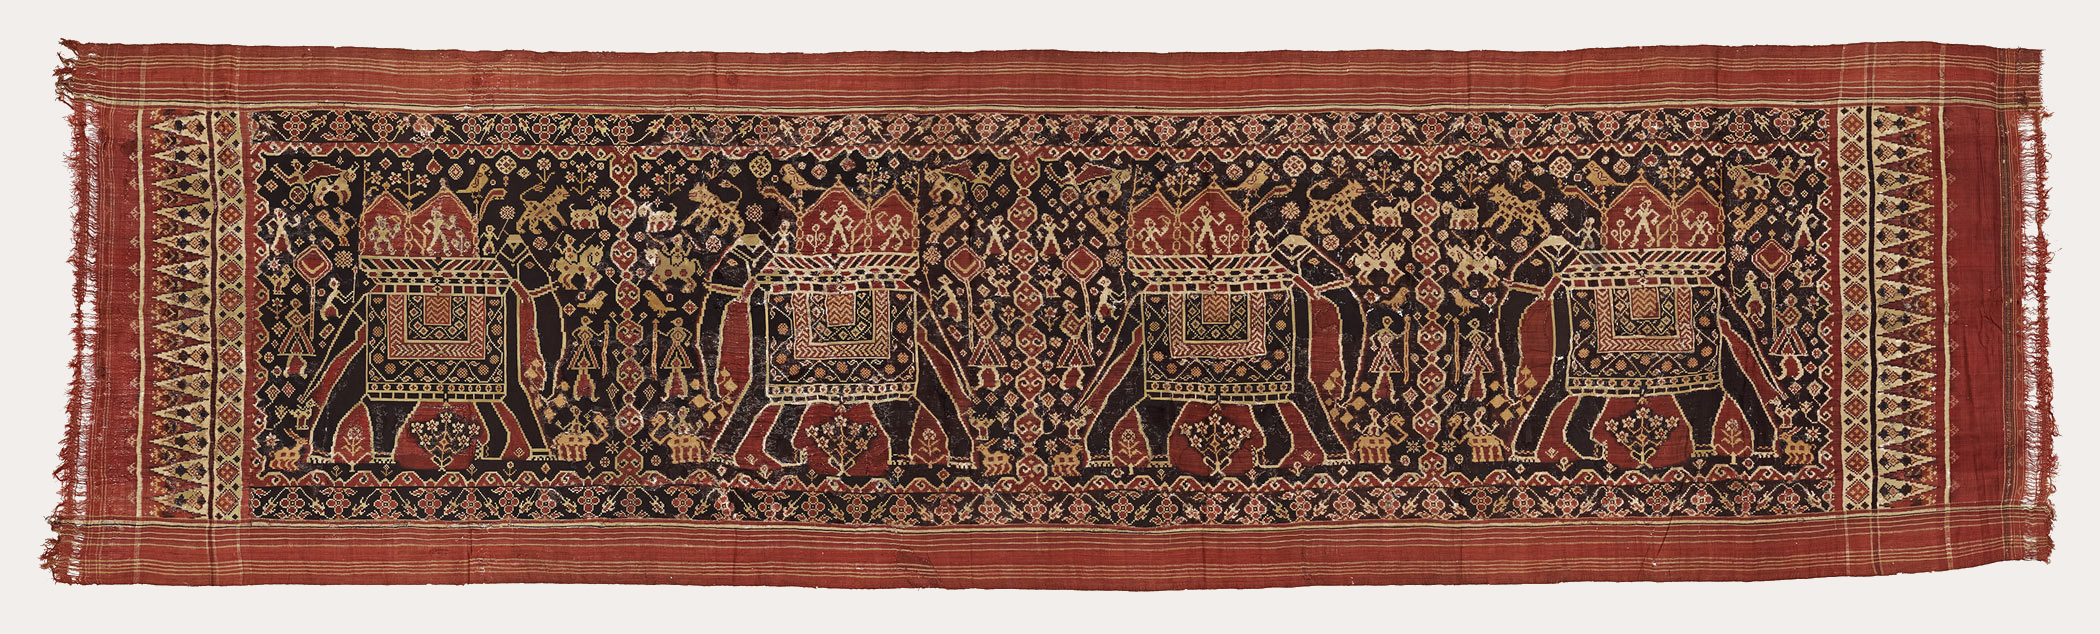 Black, pale yellow and red rectangular cloth with white outlines. Four elongated elephants next to each other, separated by three vertical bands of intricate designs. A band of triangles repeat at the smaller ends.